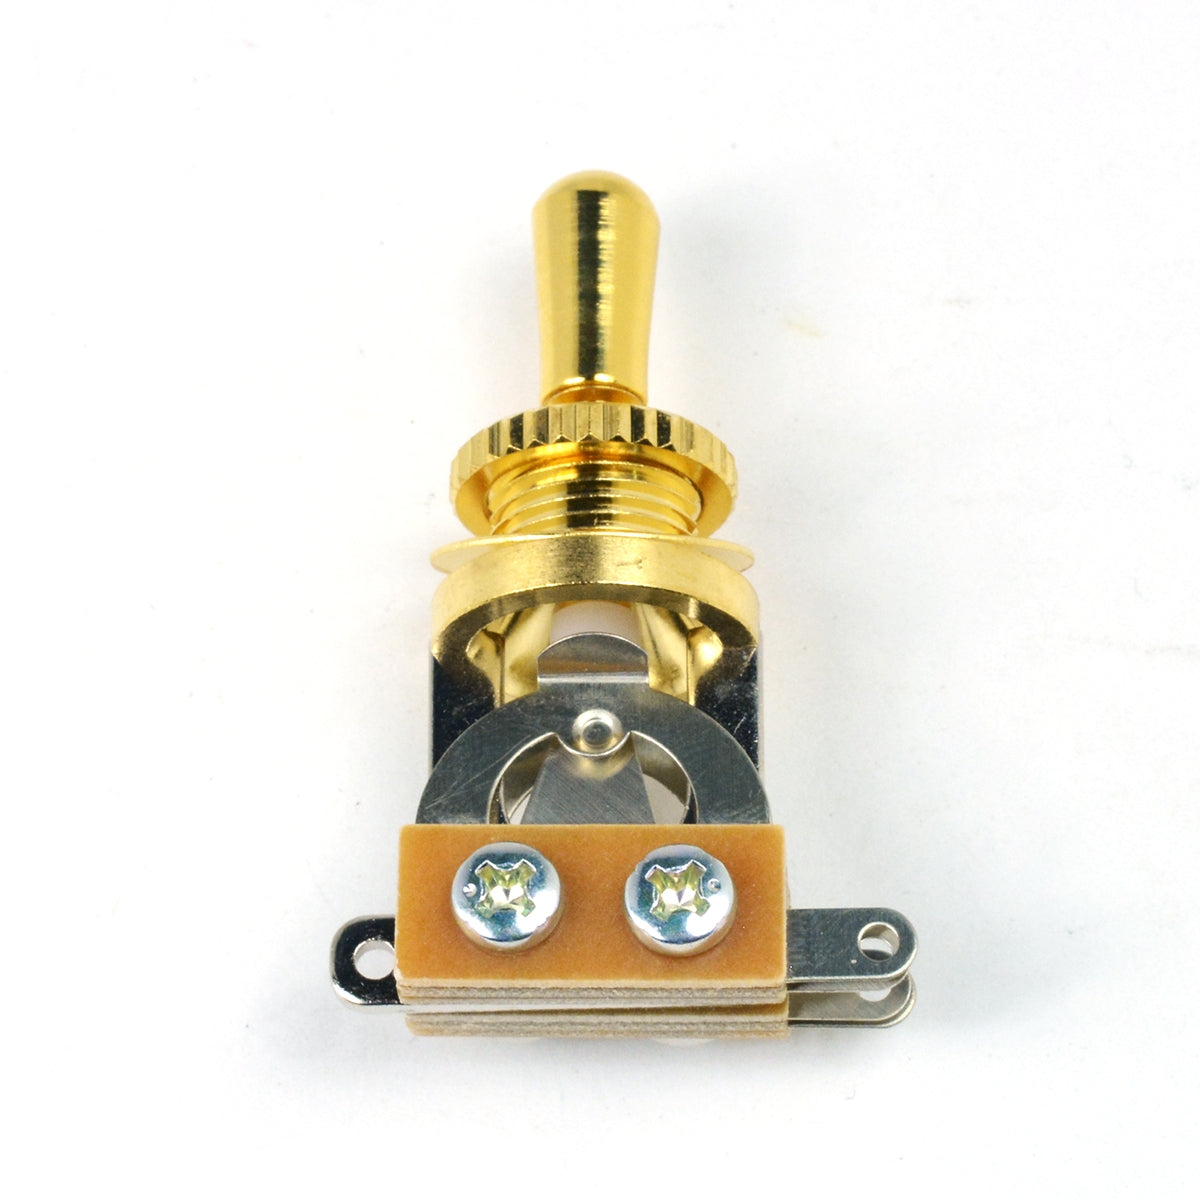 Hosco 3 way Toggle Switch in Gold Finish